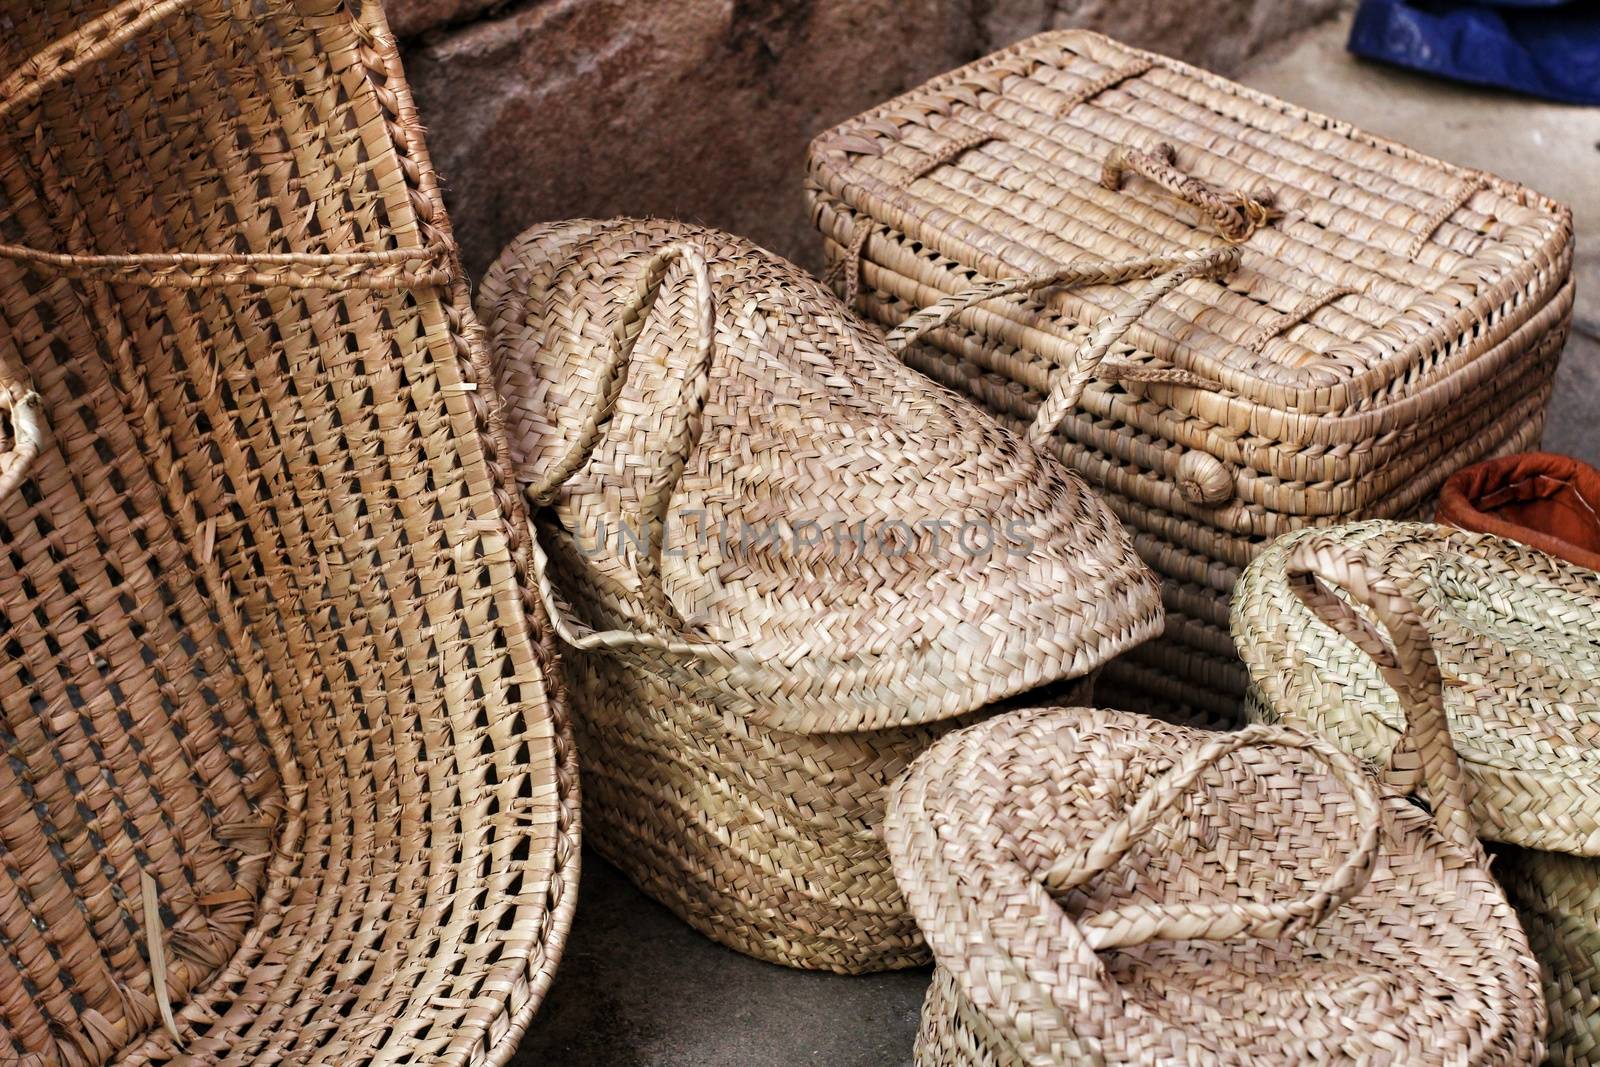 Traditional craft hemp baskets for sale in Elche, Spain